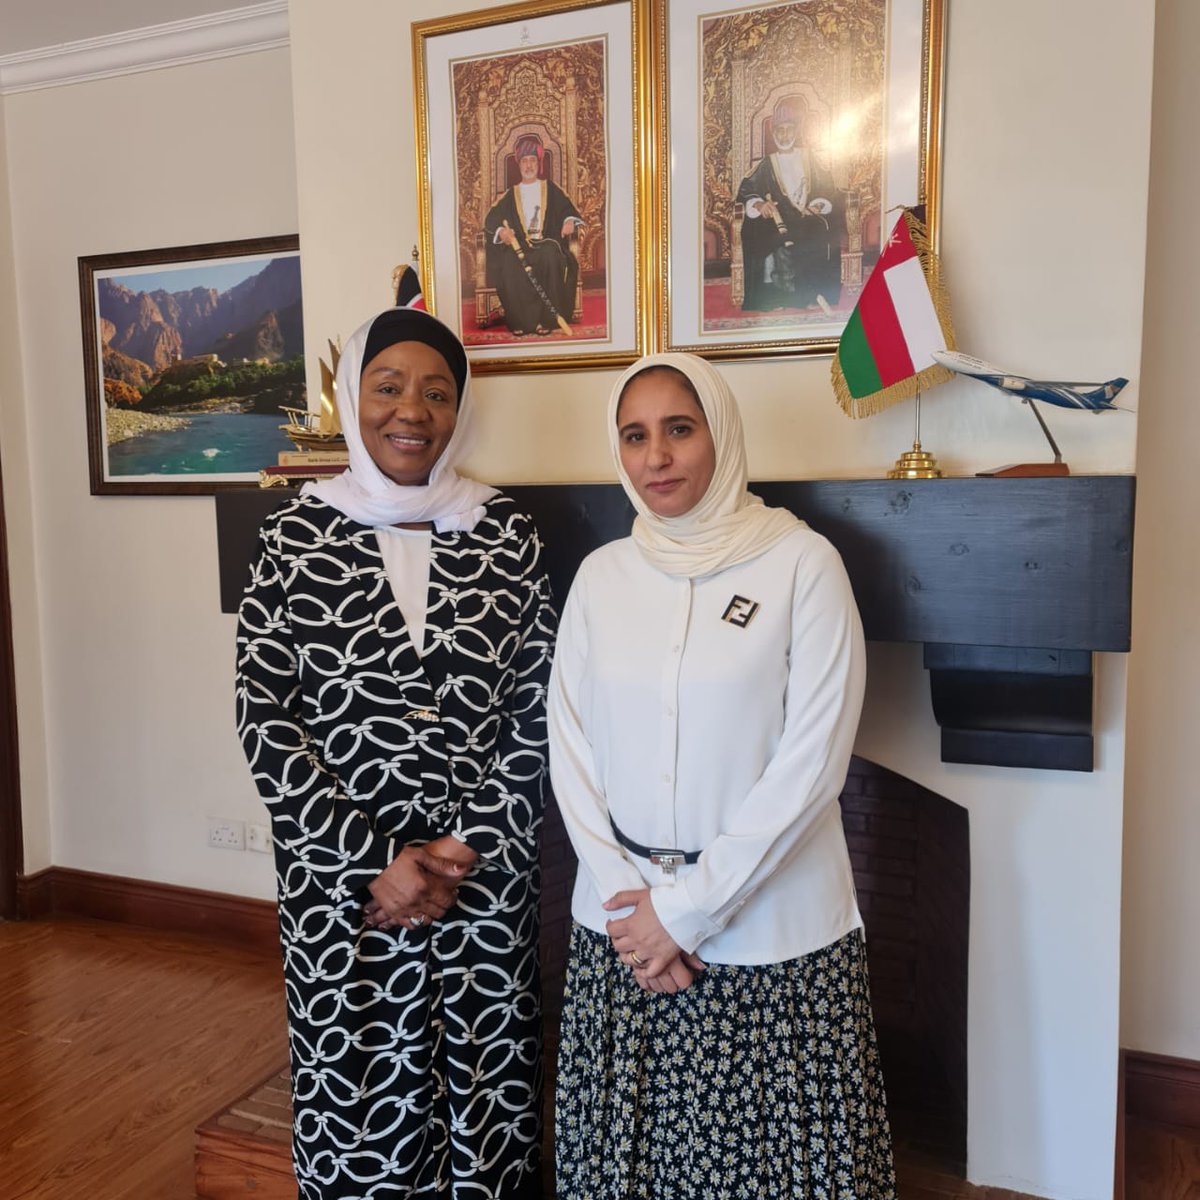 This afternoon l shared ideas with the Oman Ambassador to Kenya, Her Excellency Nasra Salim Al-Hashmi at the Embassy of the Sultanate of Oman, Nairobi